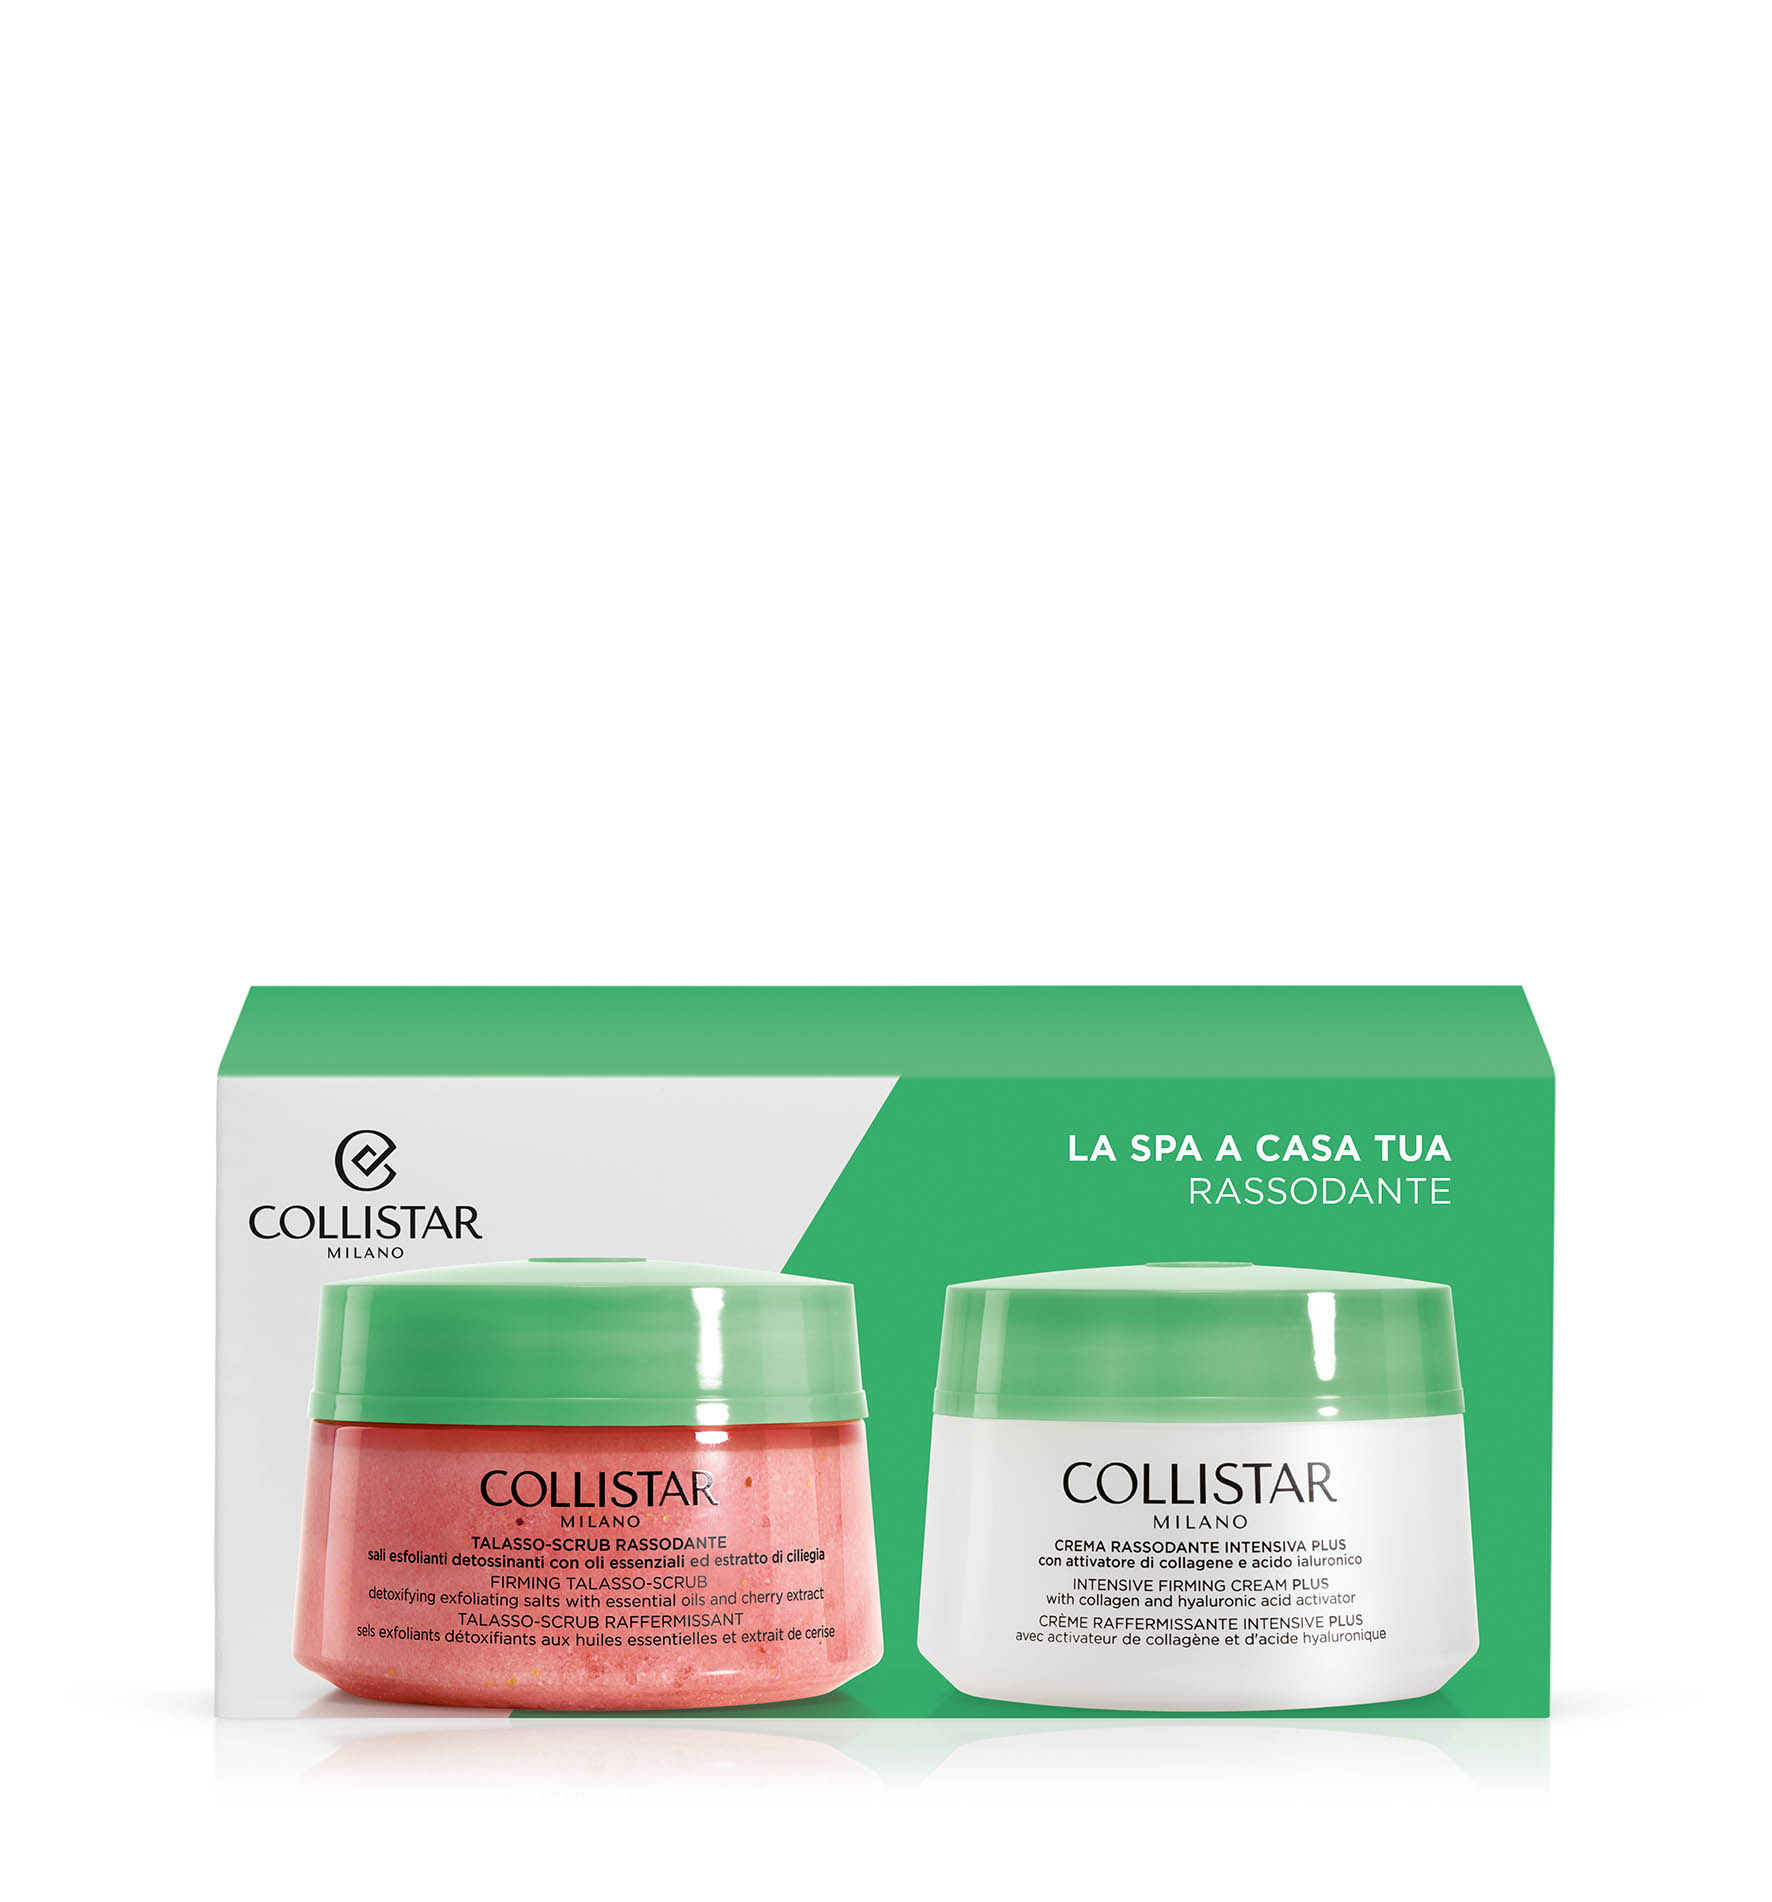 SET SPA AT HOME
- FIRMING BODY ROUTINE - Firming | Collistar - Shop Online Ufficiale